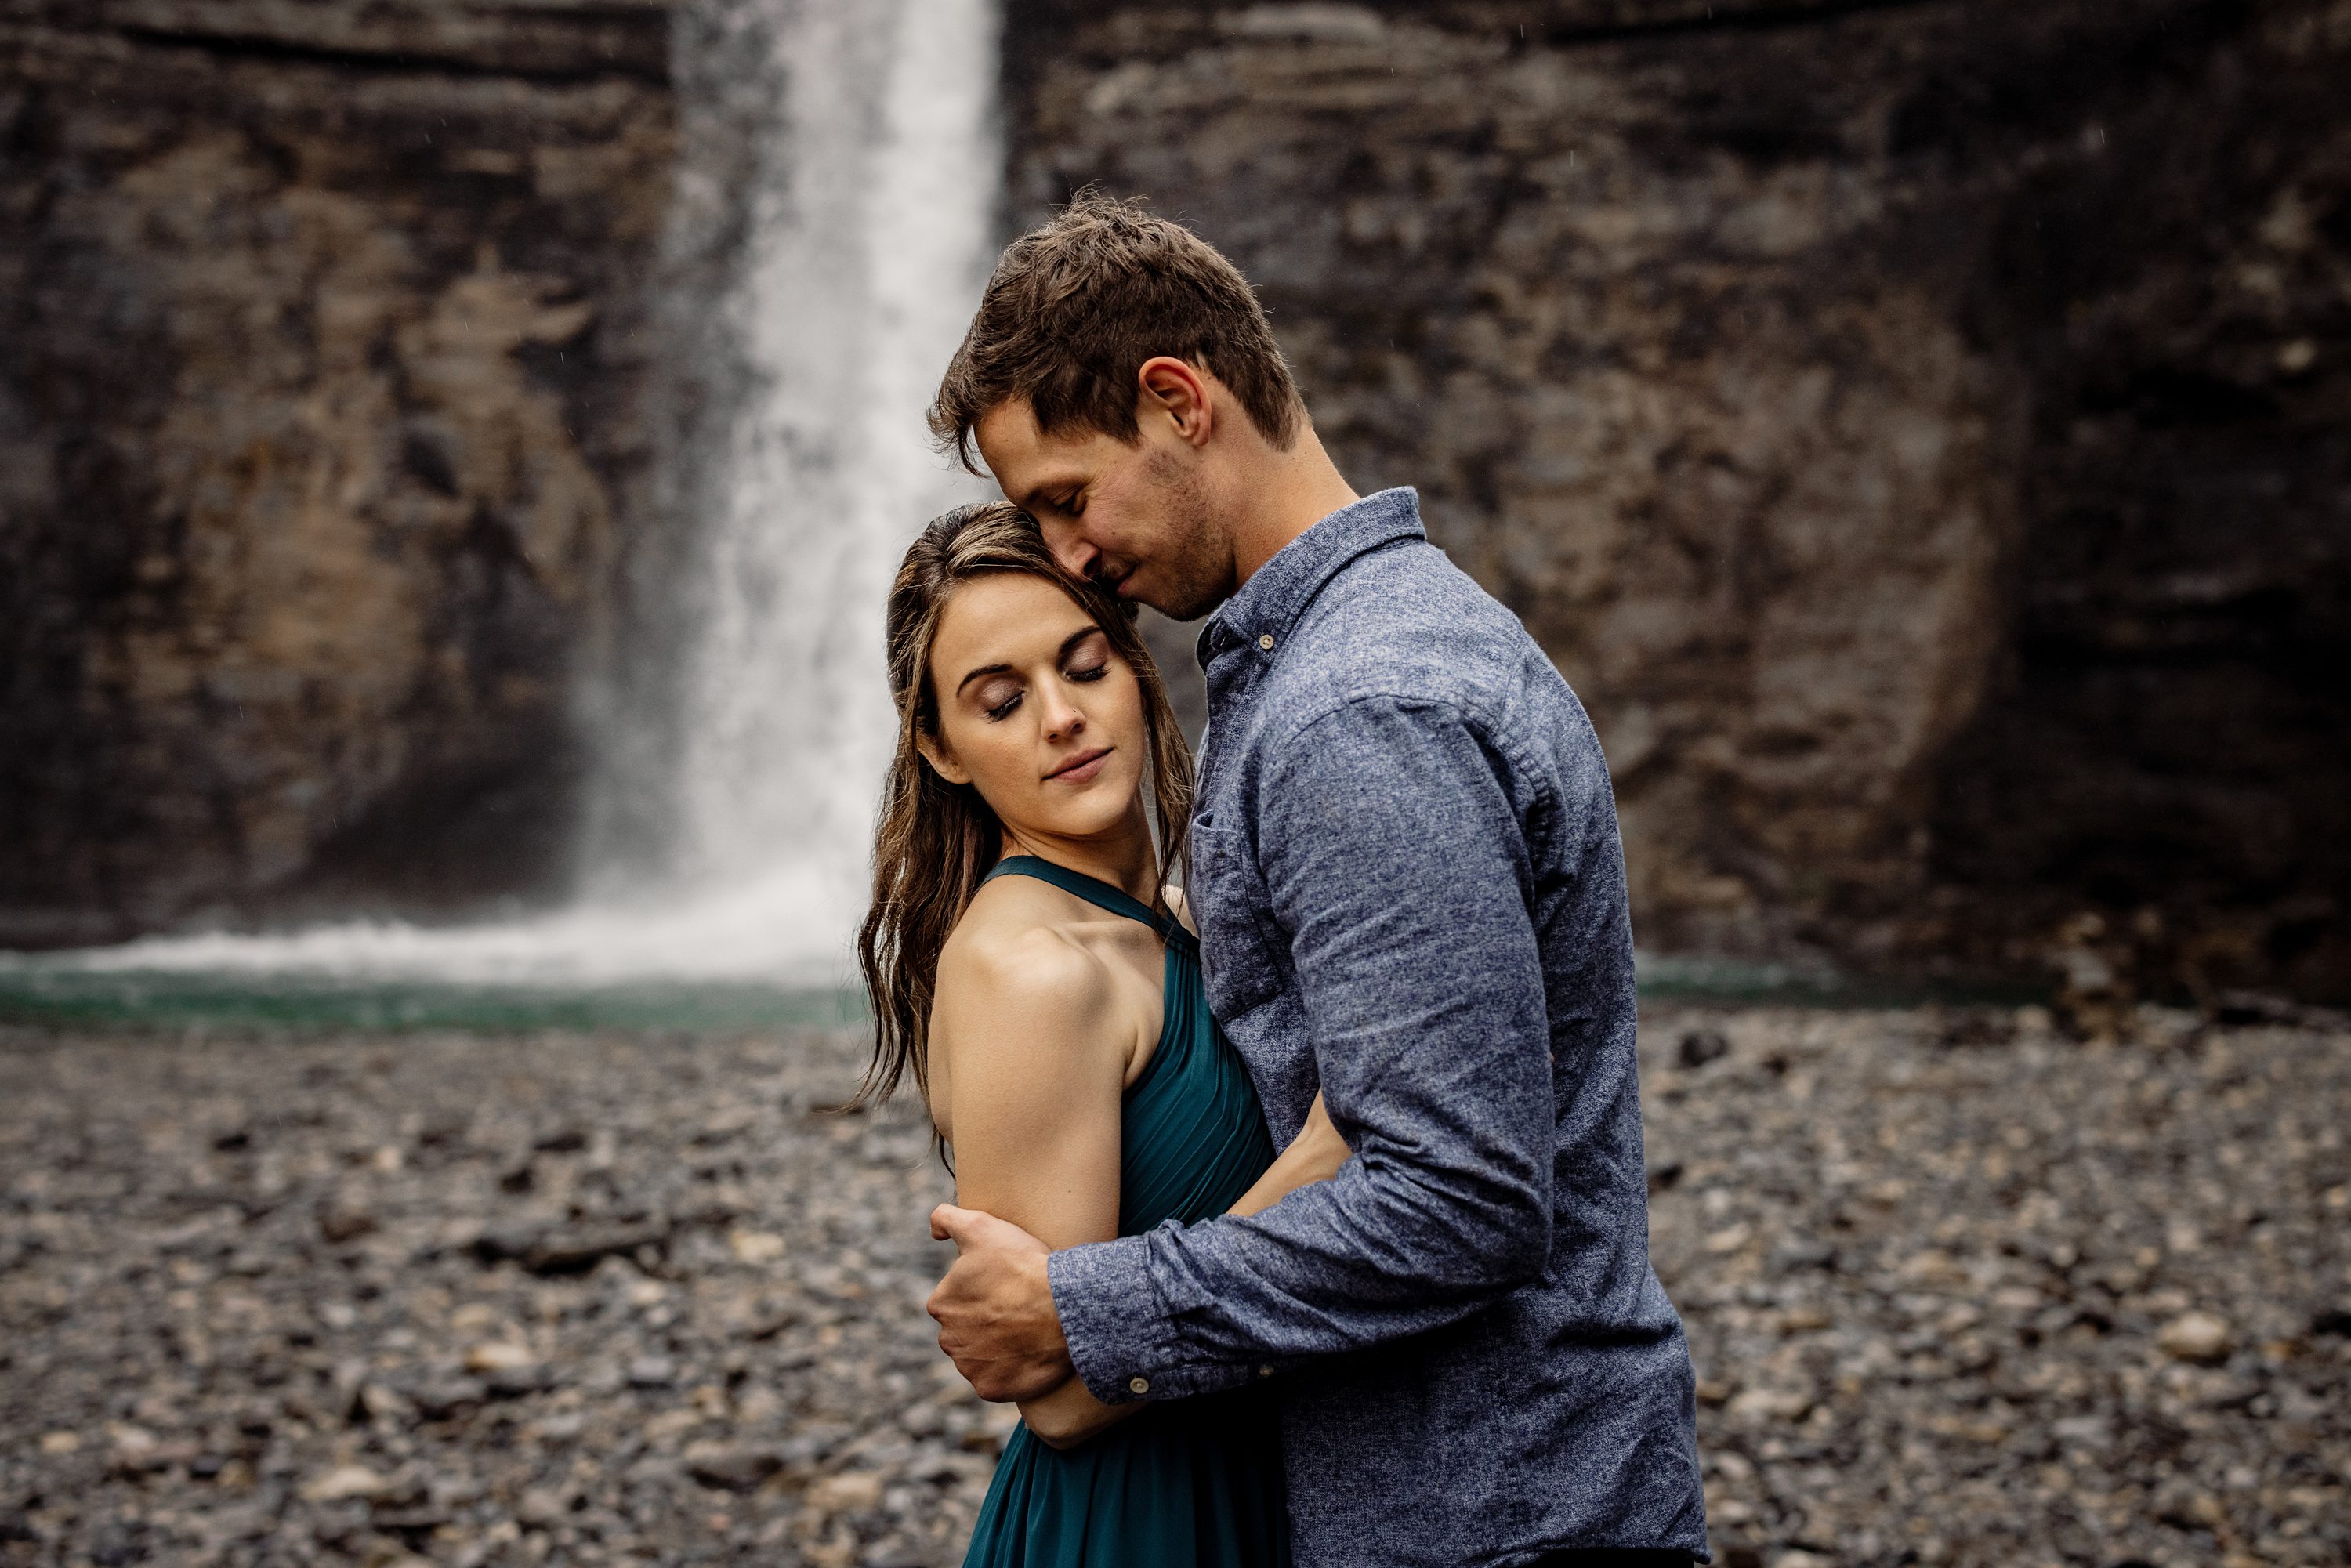  waterfall engagement photos, couple adventure session